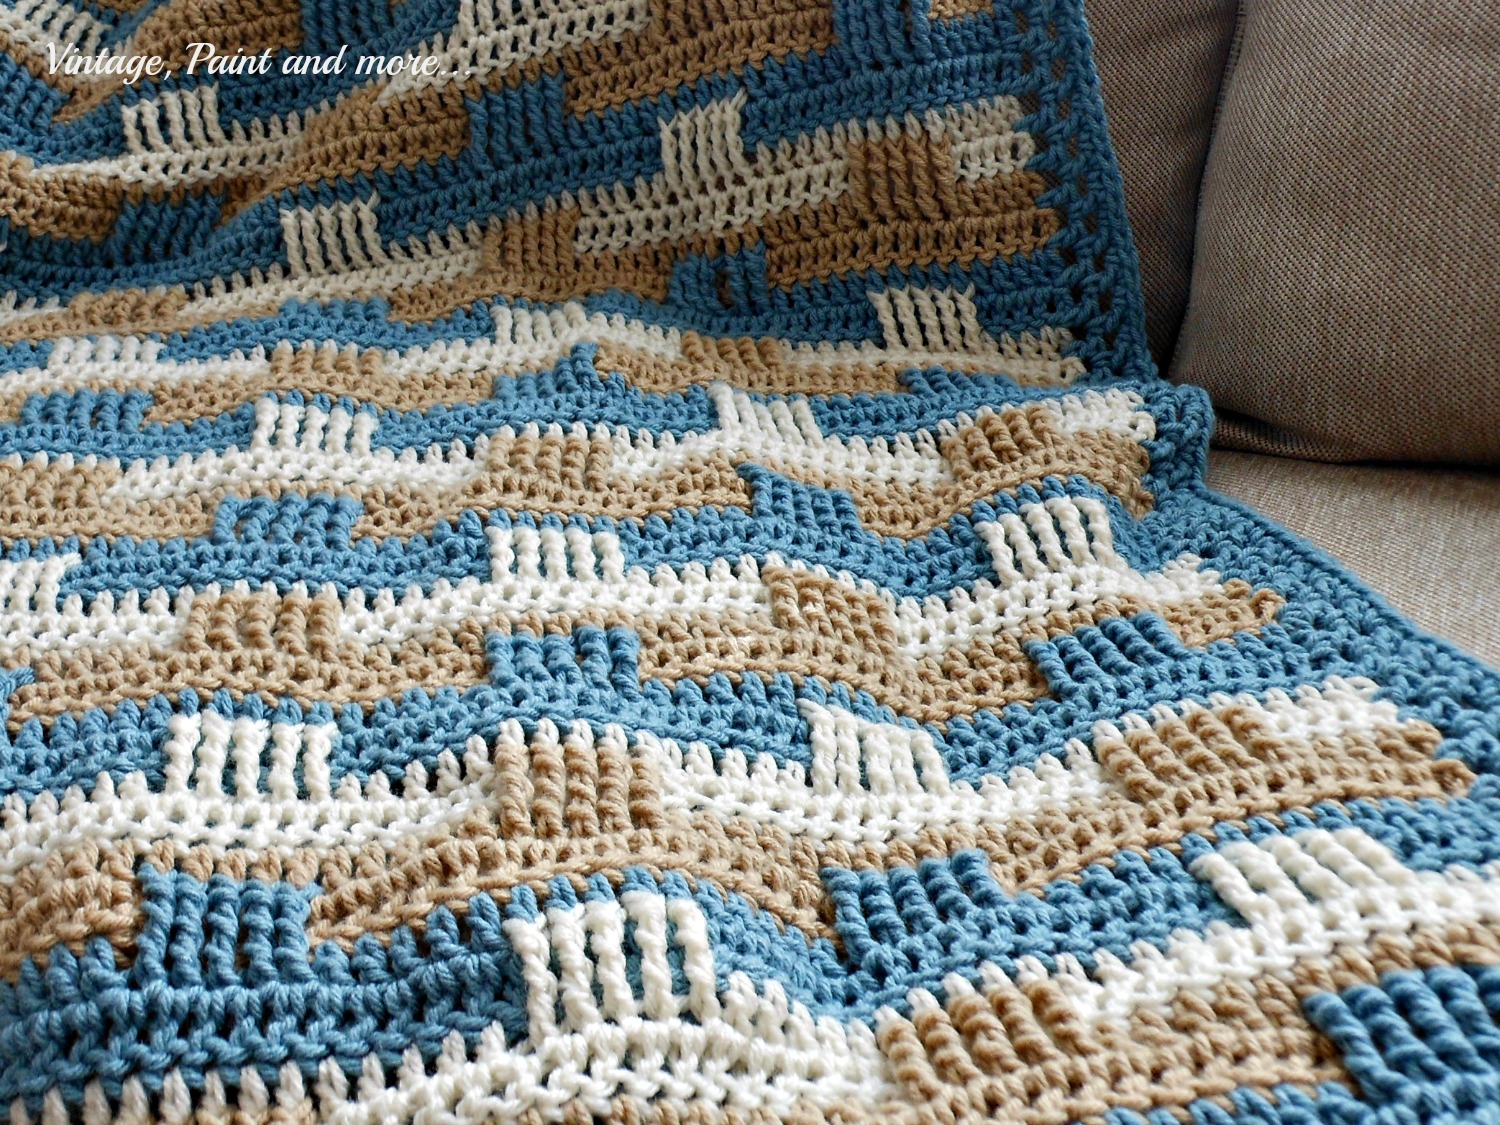 crocheted afghan done in coastal color pallate